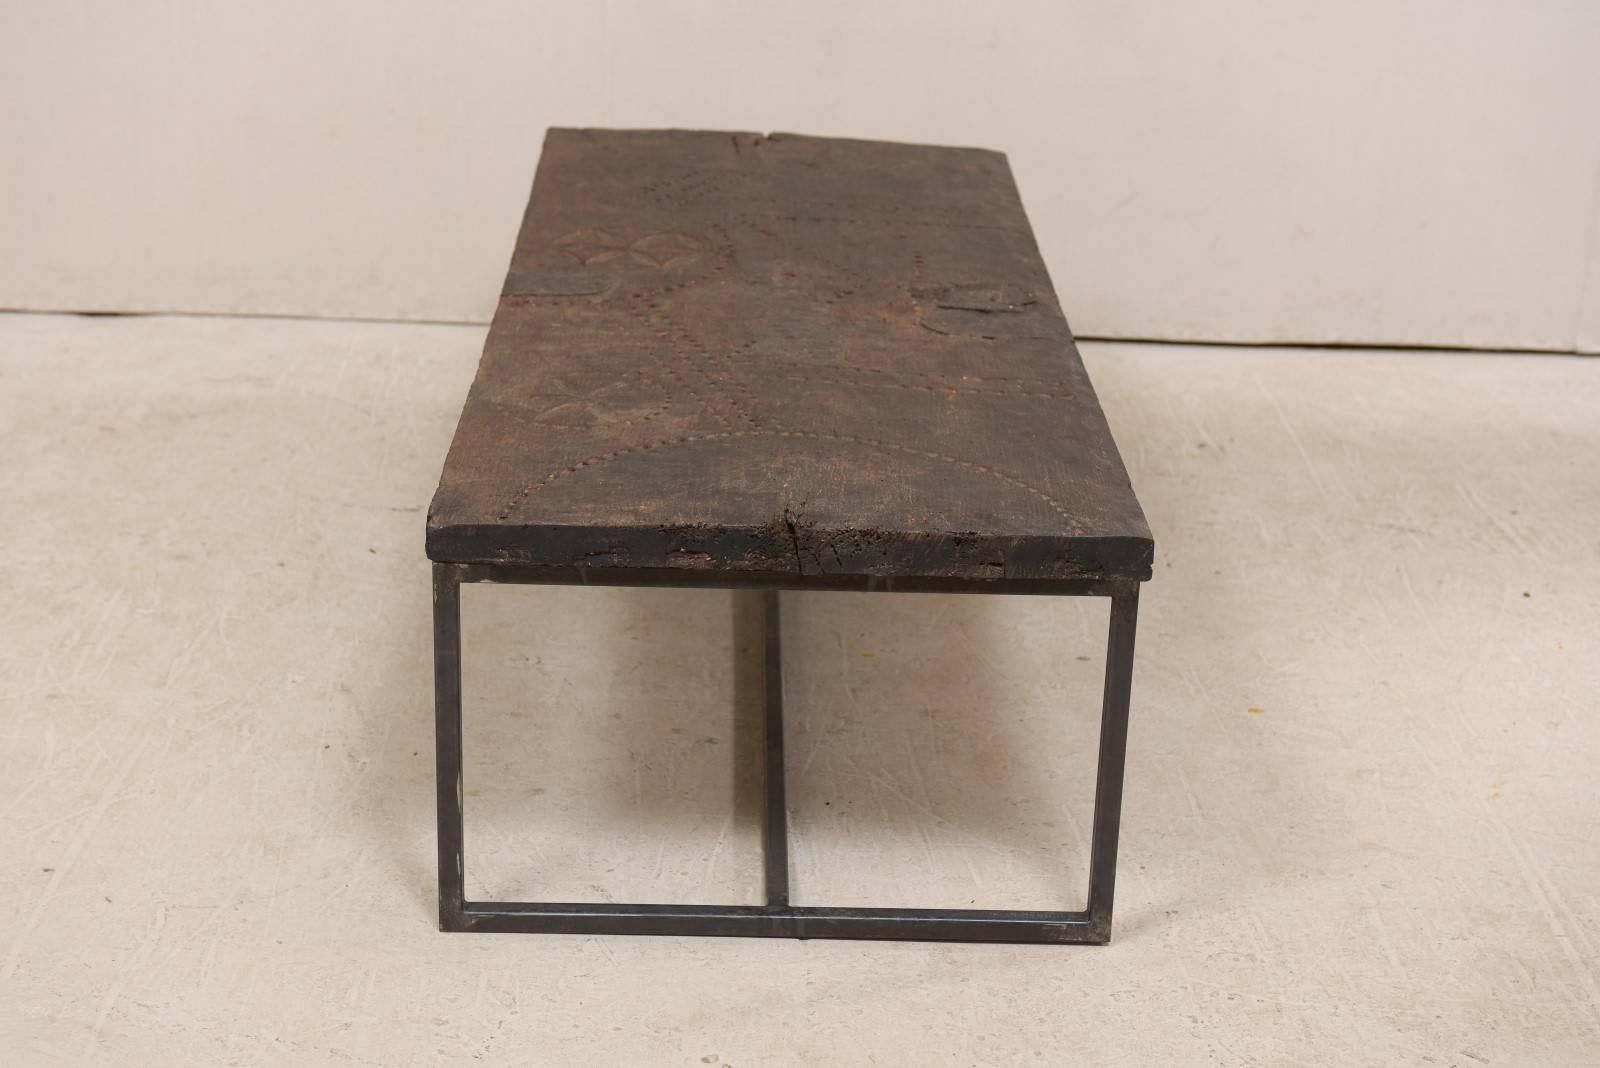 Carved Coffee Table Made from 18th Century Spanish Wood Door and Custom Iron Base